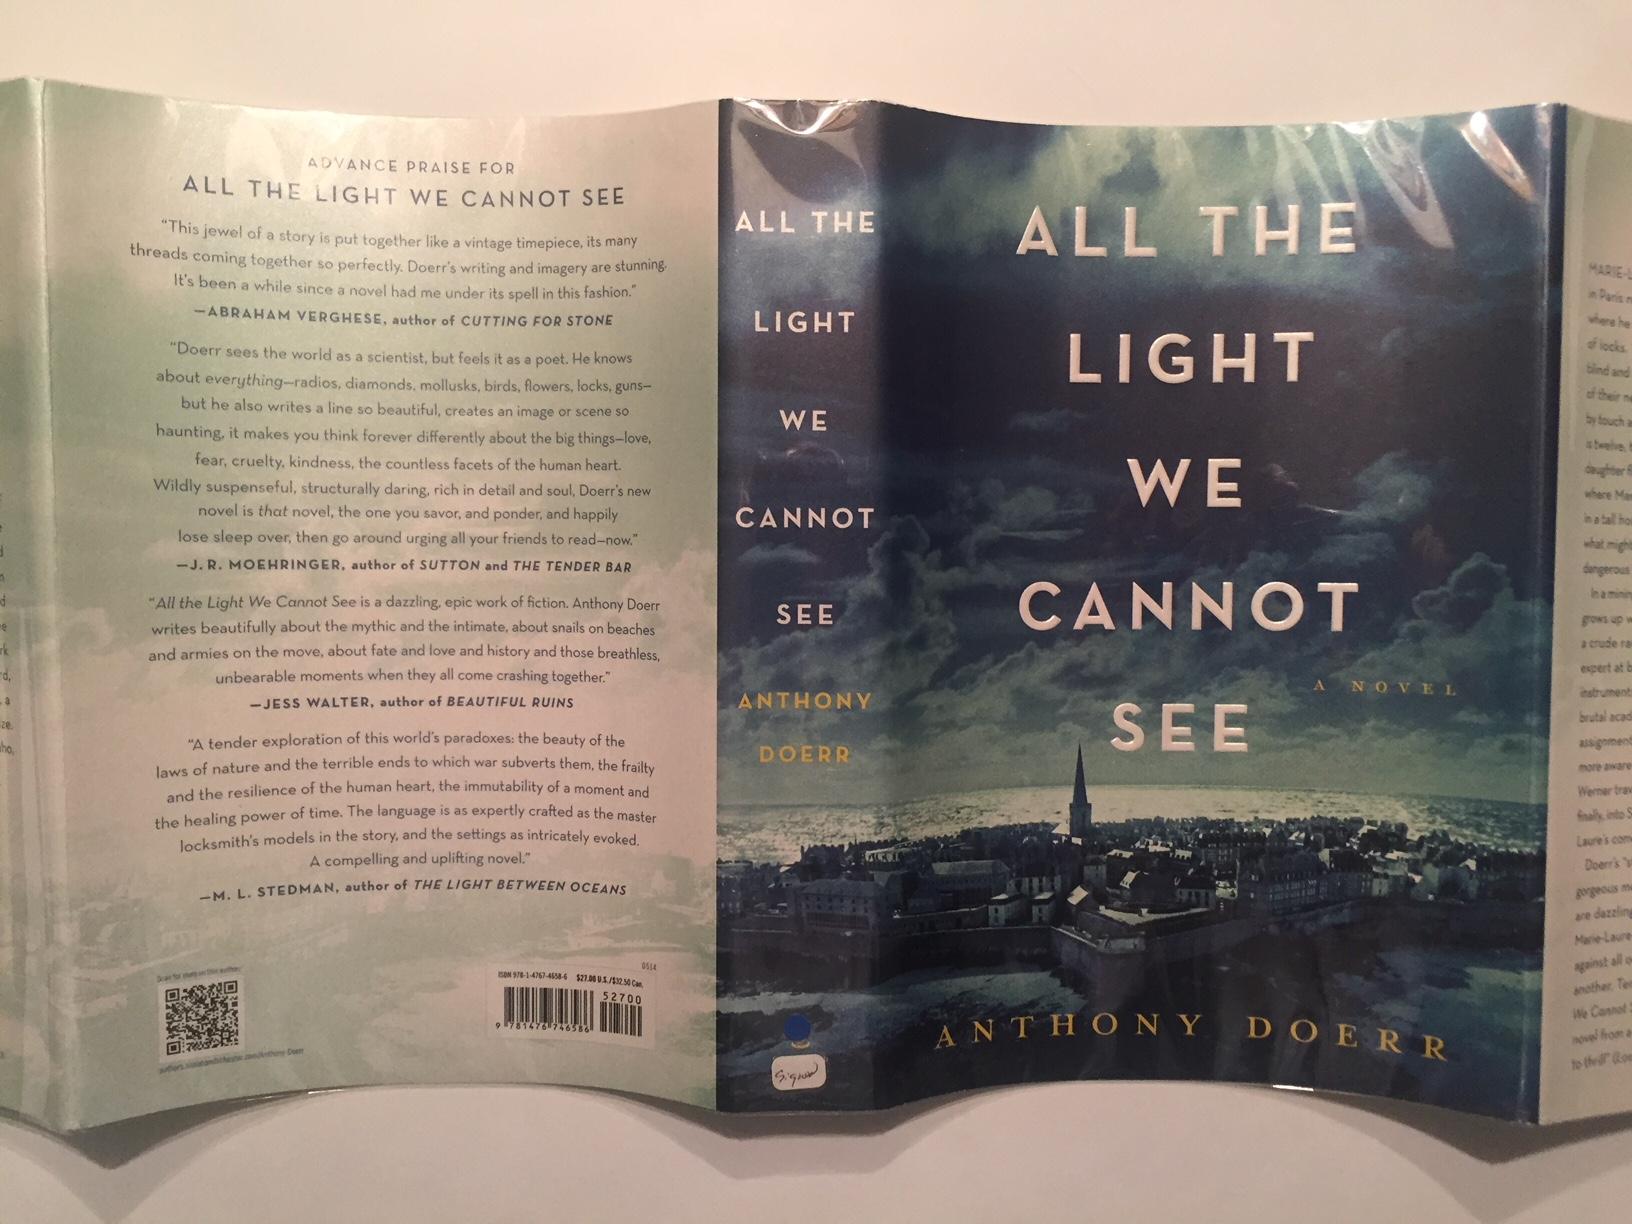 fremtid Tilsvarende garn All the Light We Cannot See [1st PRINT / SIGNED & DATED] by Anthony Doerr:  New Hardcover (2014) 1st Edition, Signed by Author(s) |  OldBooksFromTheBasement